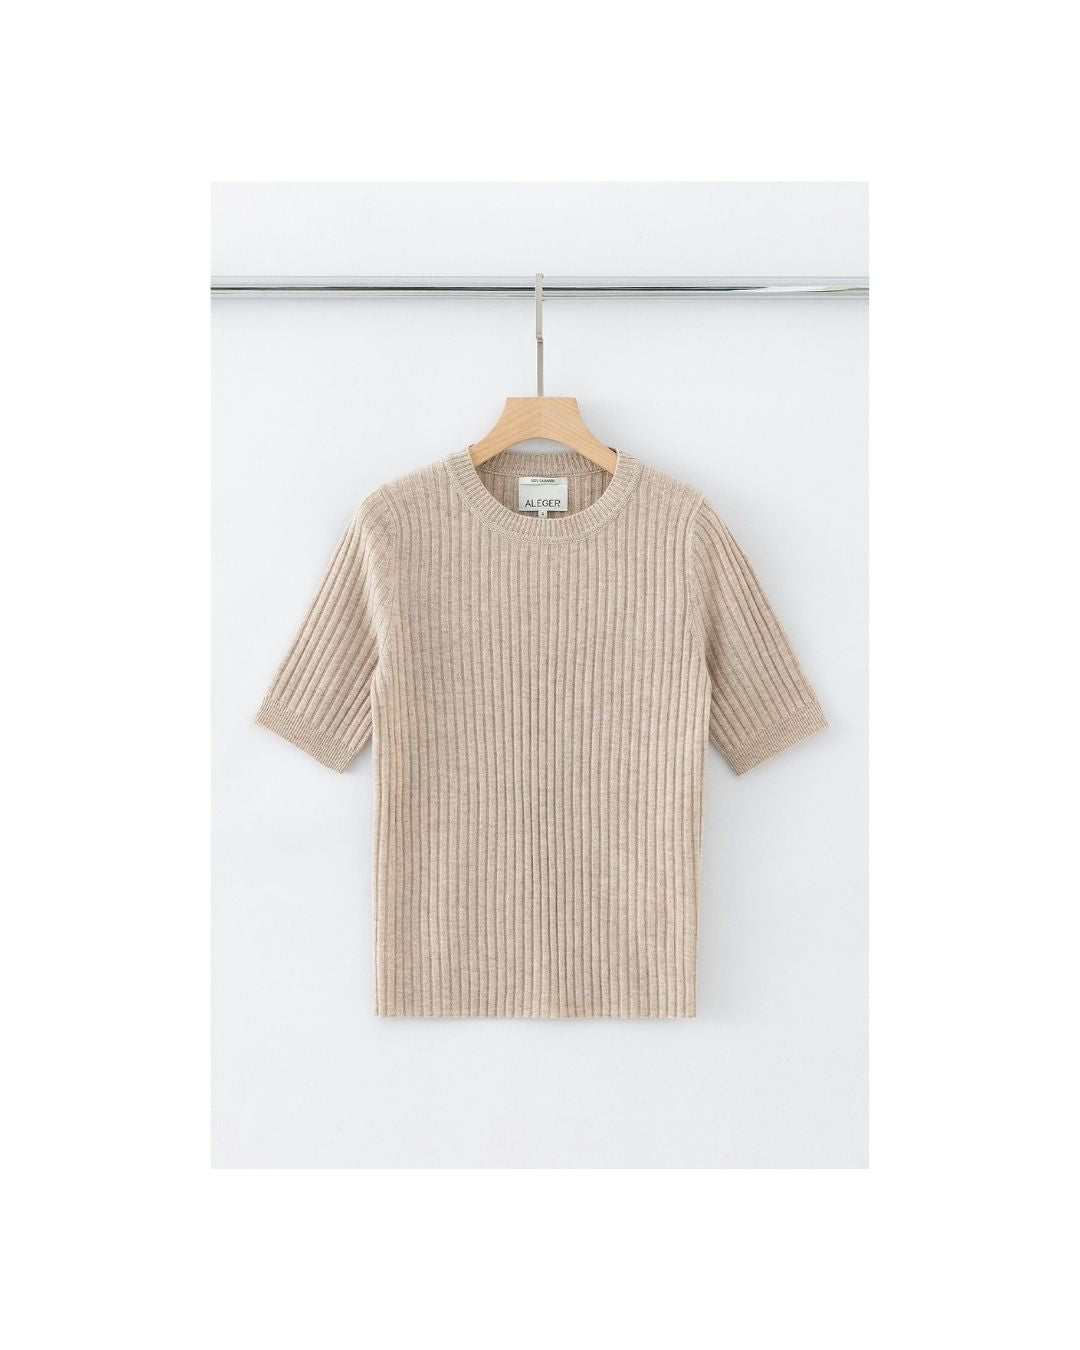 N.48 ALEGER 100% Cashmere Short Sleeve T - CHAMPAGNE